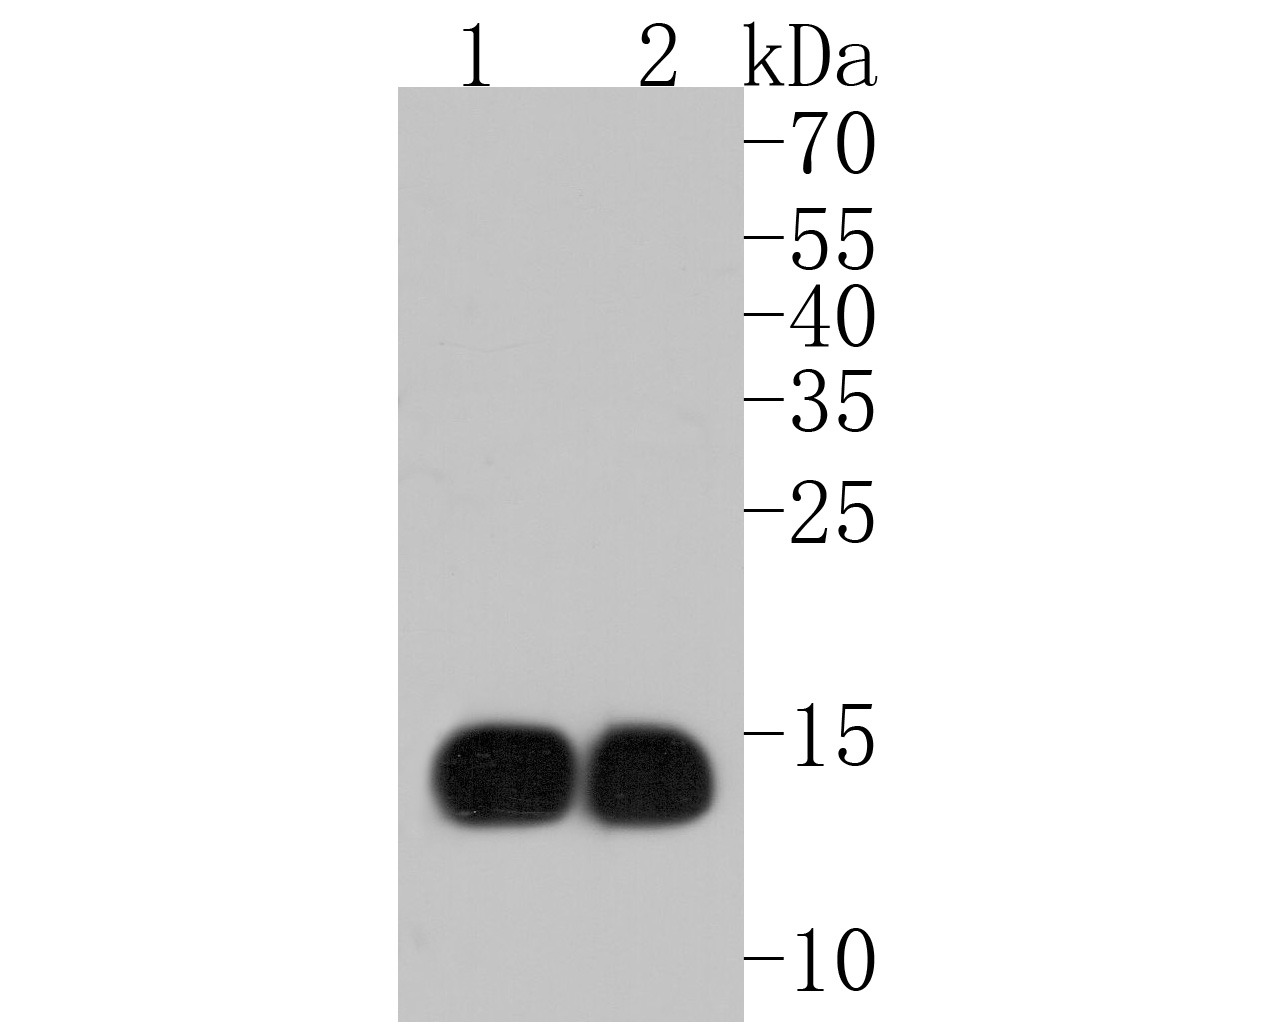 Western blot analysis of Hemoglobin subunit gamma 1and2 on different lysates. Proteins were transferred to a PVDF membrane and blocked with 5% BSA in PBS for 1 hour at room temperature. The primary antibody (ET1703-46, 1/500) was used in 5% BSA at room temperature for 2 hours. Goat Anti-Rabbit IgG - HRP Secondary Antibody (HA1001) at 1:5,000 dilution was used for 1 hour at room temperature.<br />
Positive control: <br />
Lane 1: human placenta tissue lysate<br />
Lane 2: human brain tissue lysate